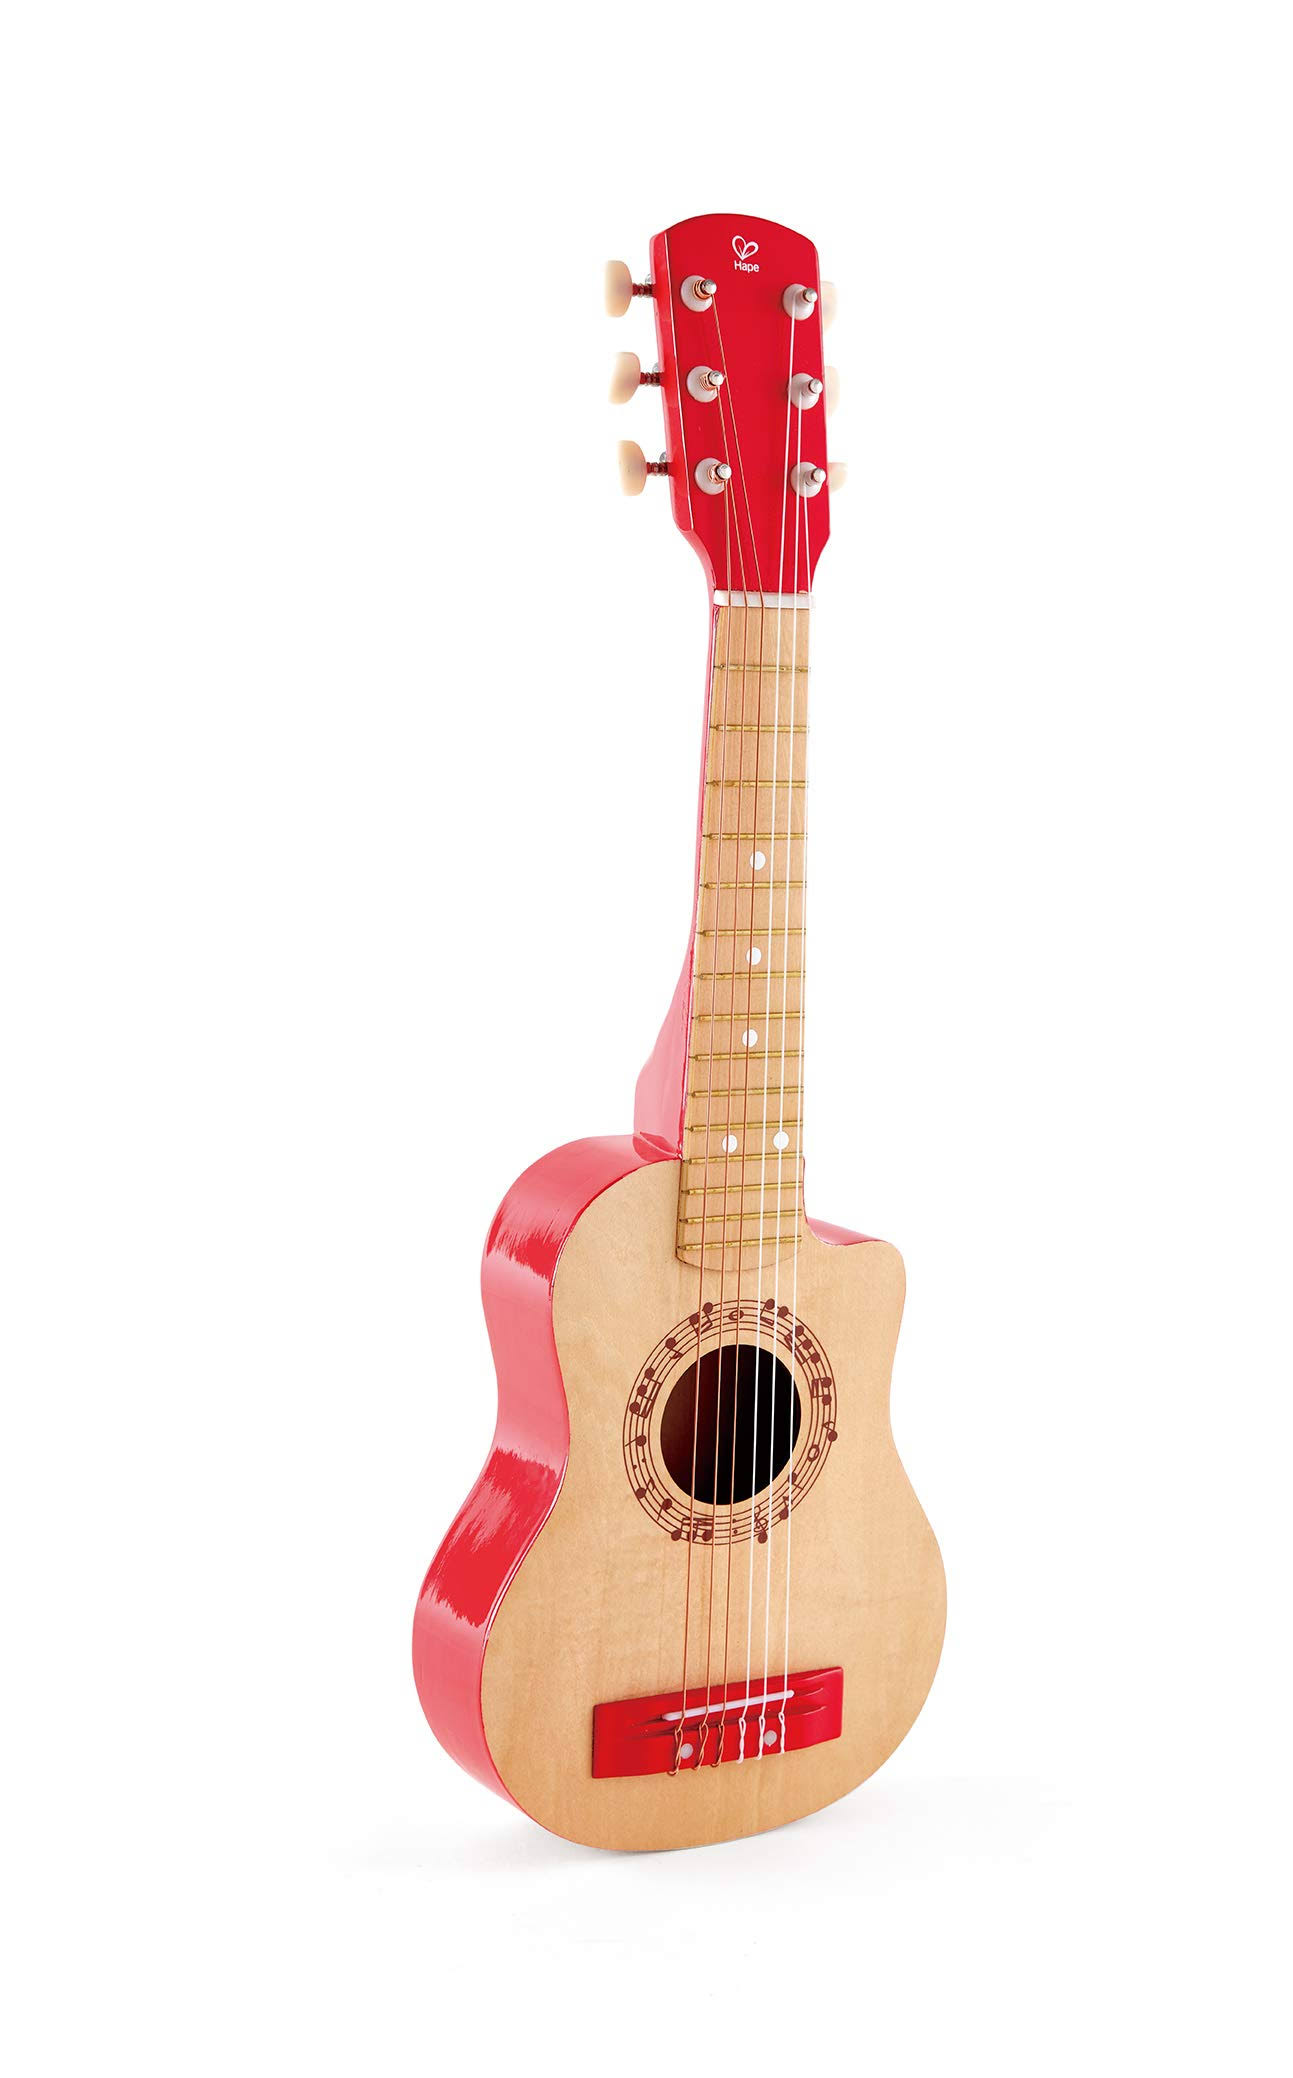 Hape Kid's Flame First Musical Guitar - Red